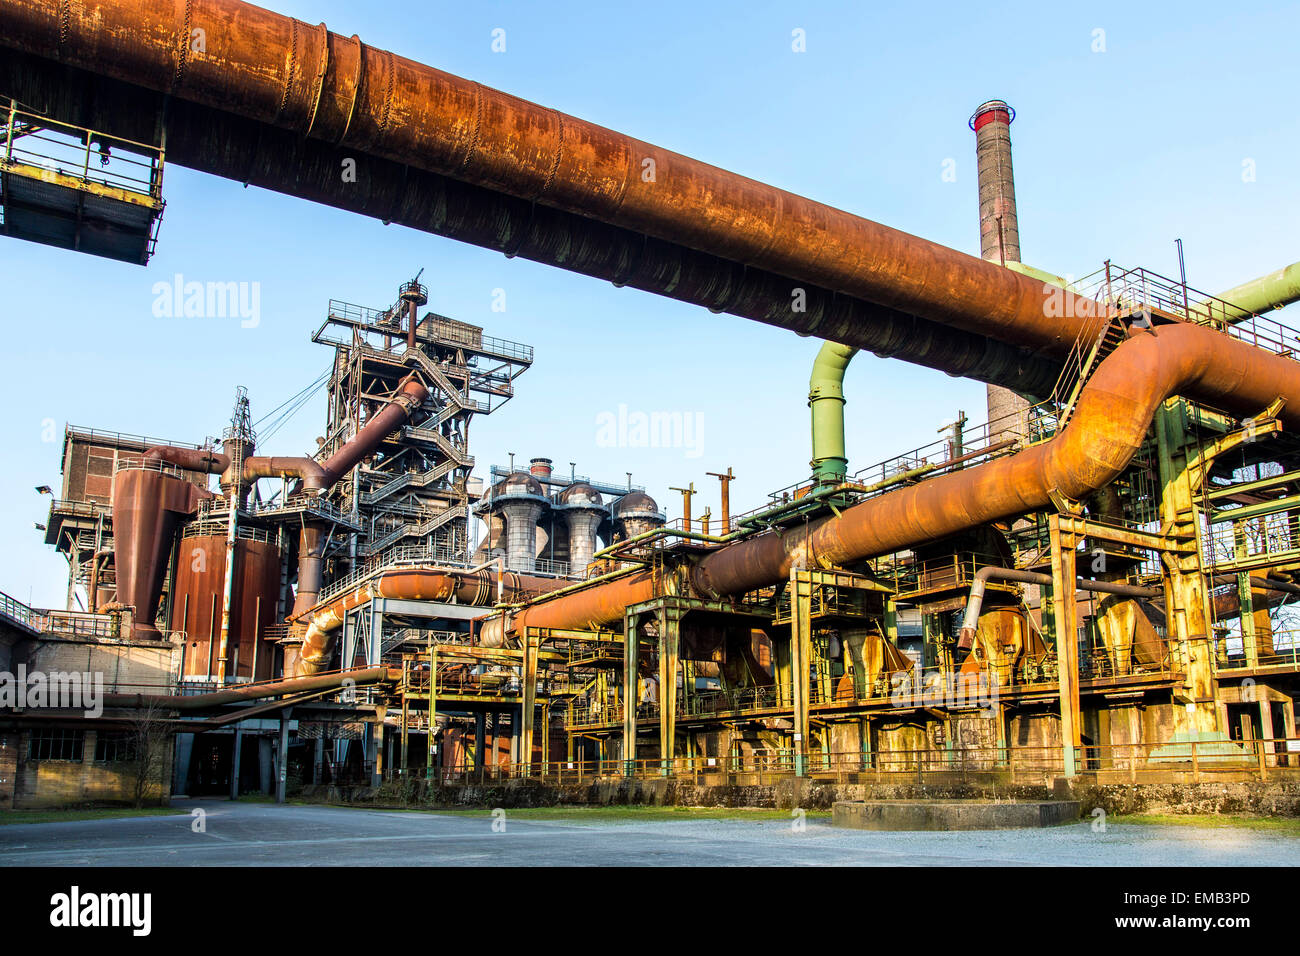 Former steel works in Duisburg, Germany, today a 'Lanschaftspark'- Landscape park, industrial heritage site, open to public Stock Photo